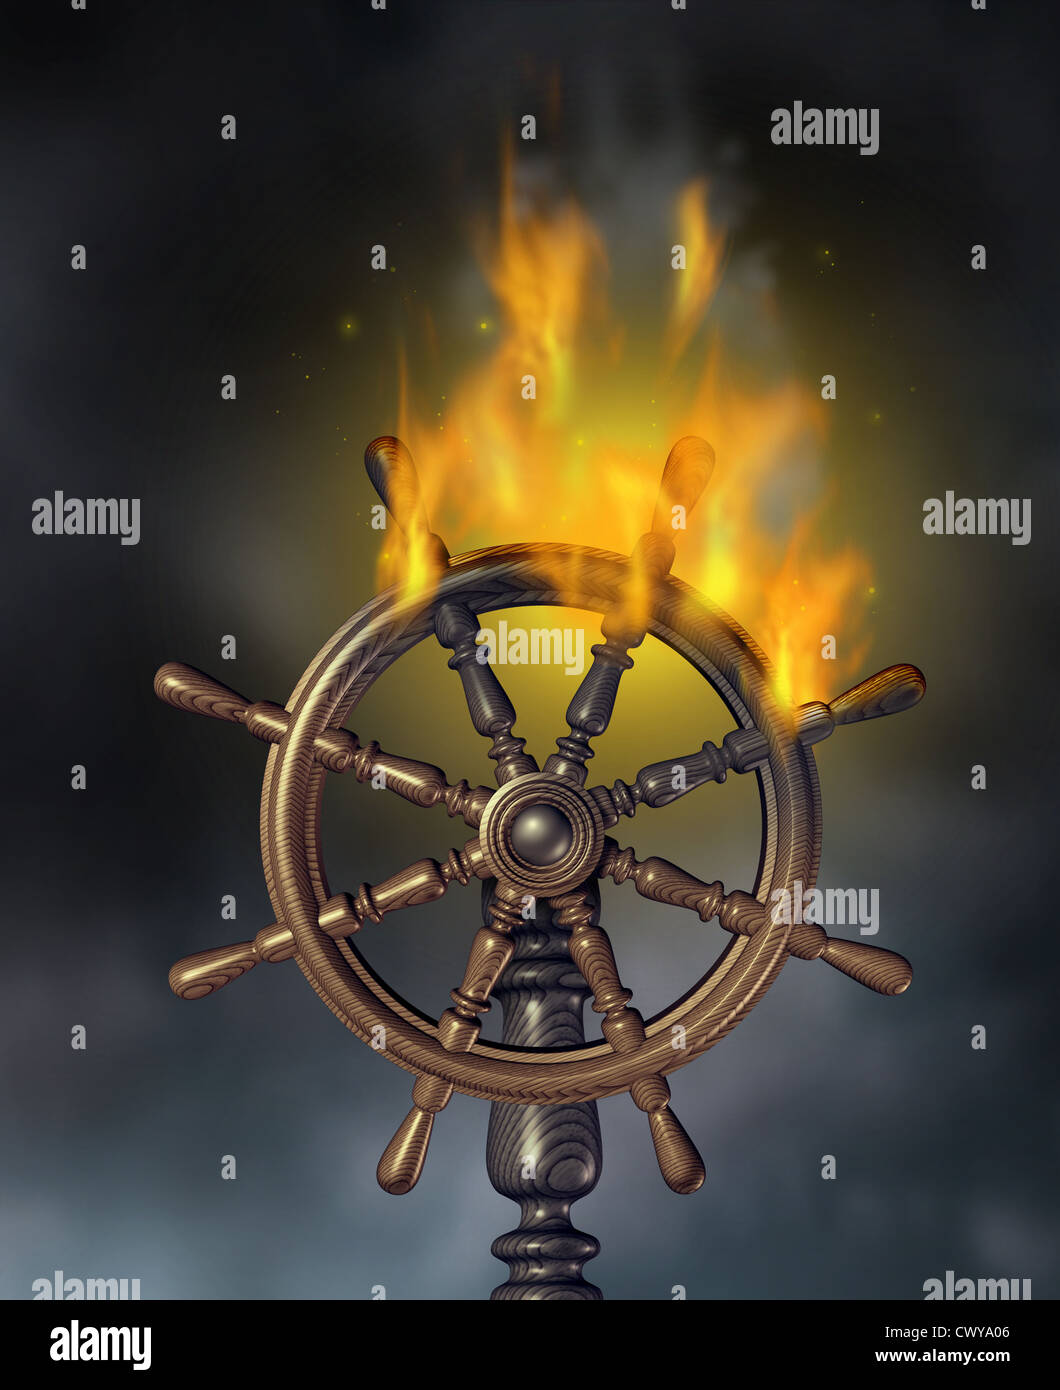 Business crisis and financial disaster economic symbol with a burning navigation wood marine ship wheel in flames representing danger and need for insurance on a dark storm cloudy sky. Stock Photo